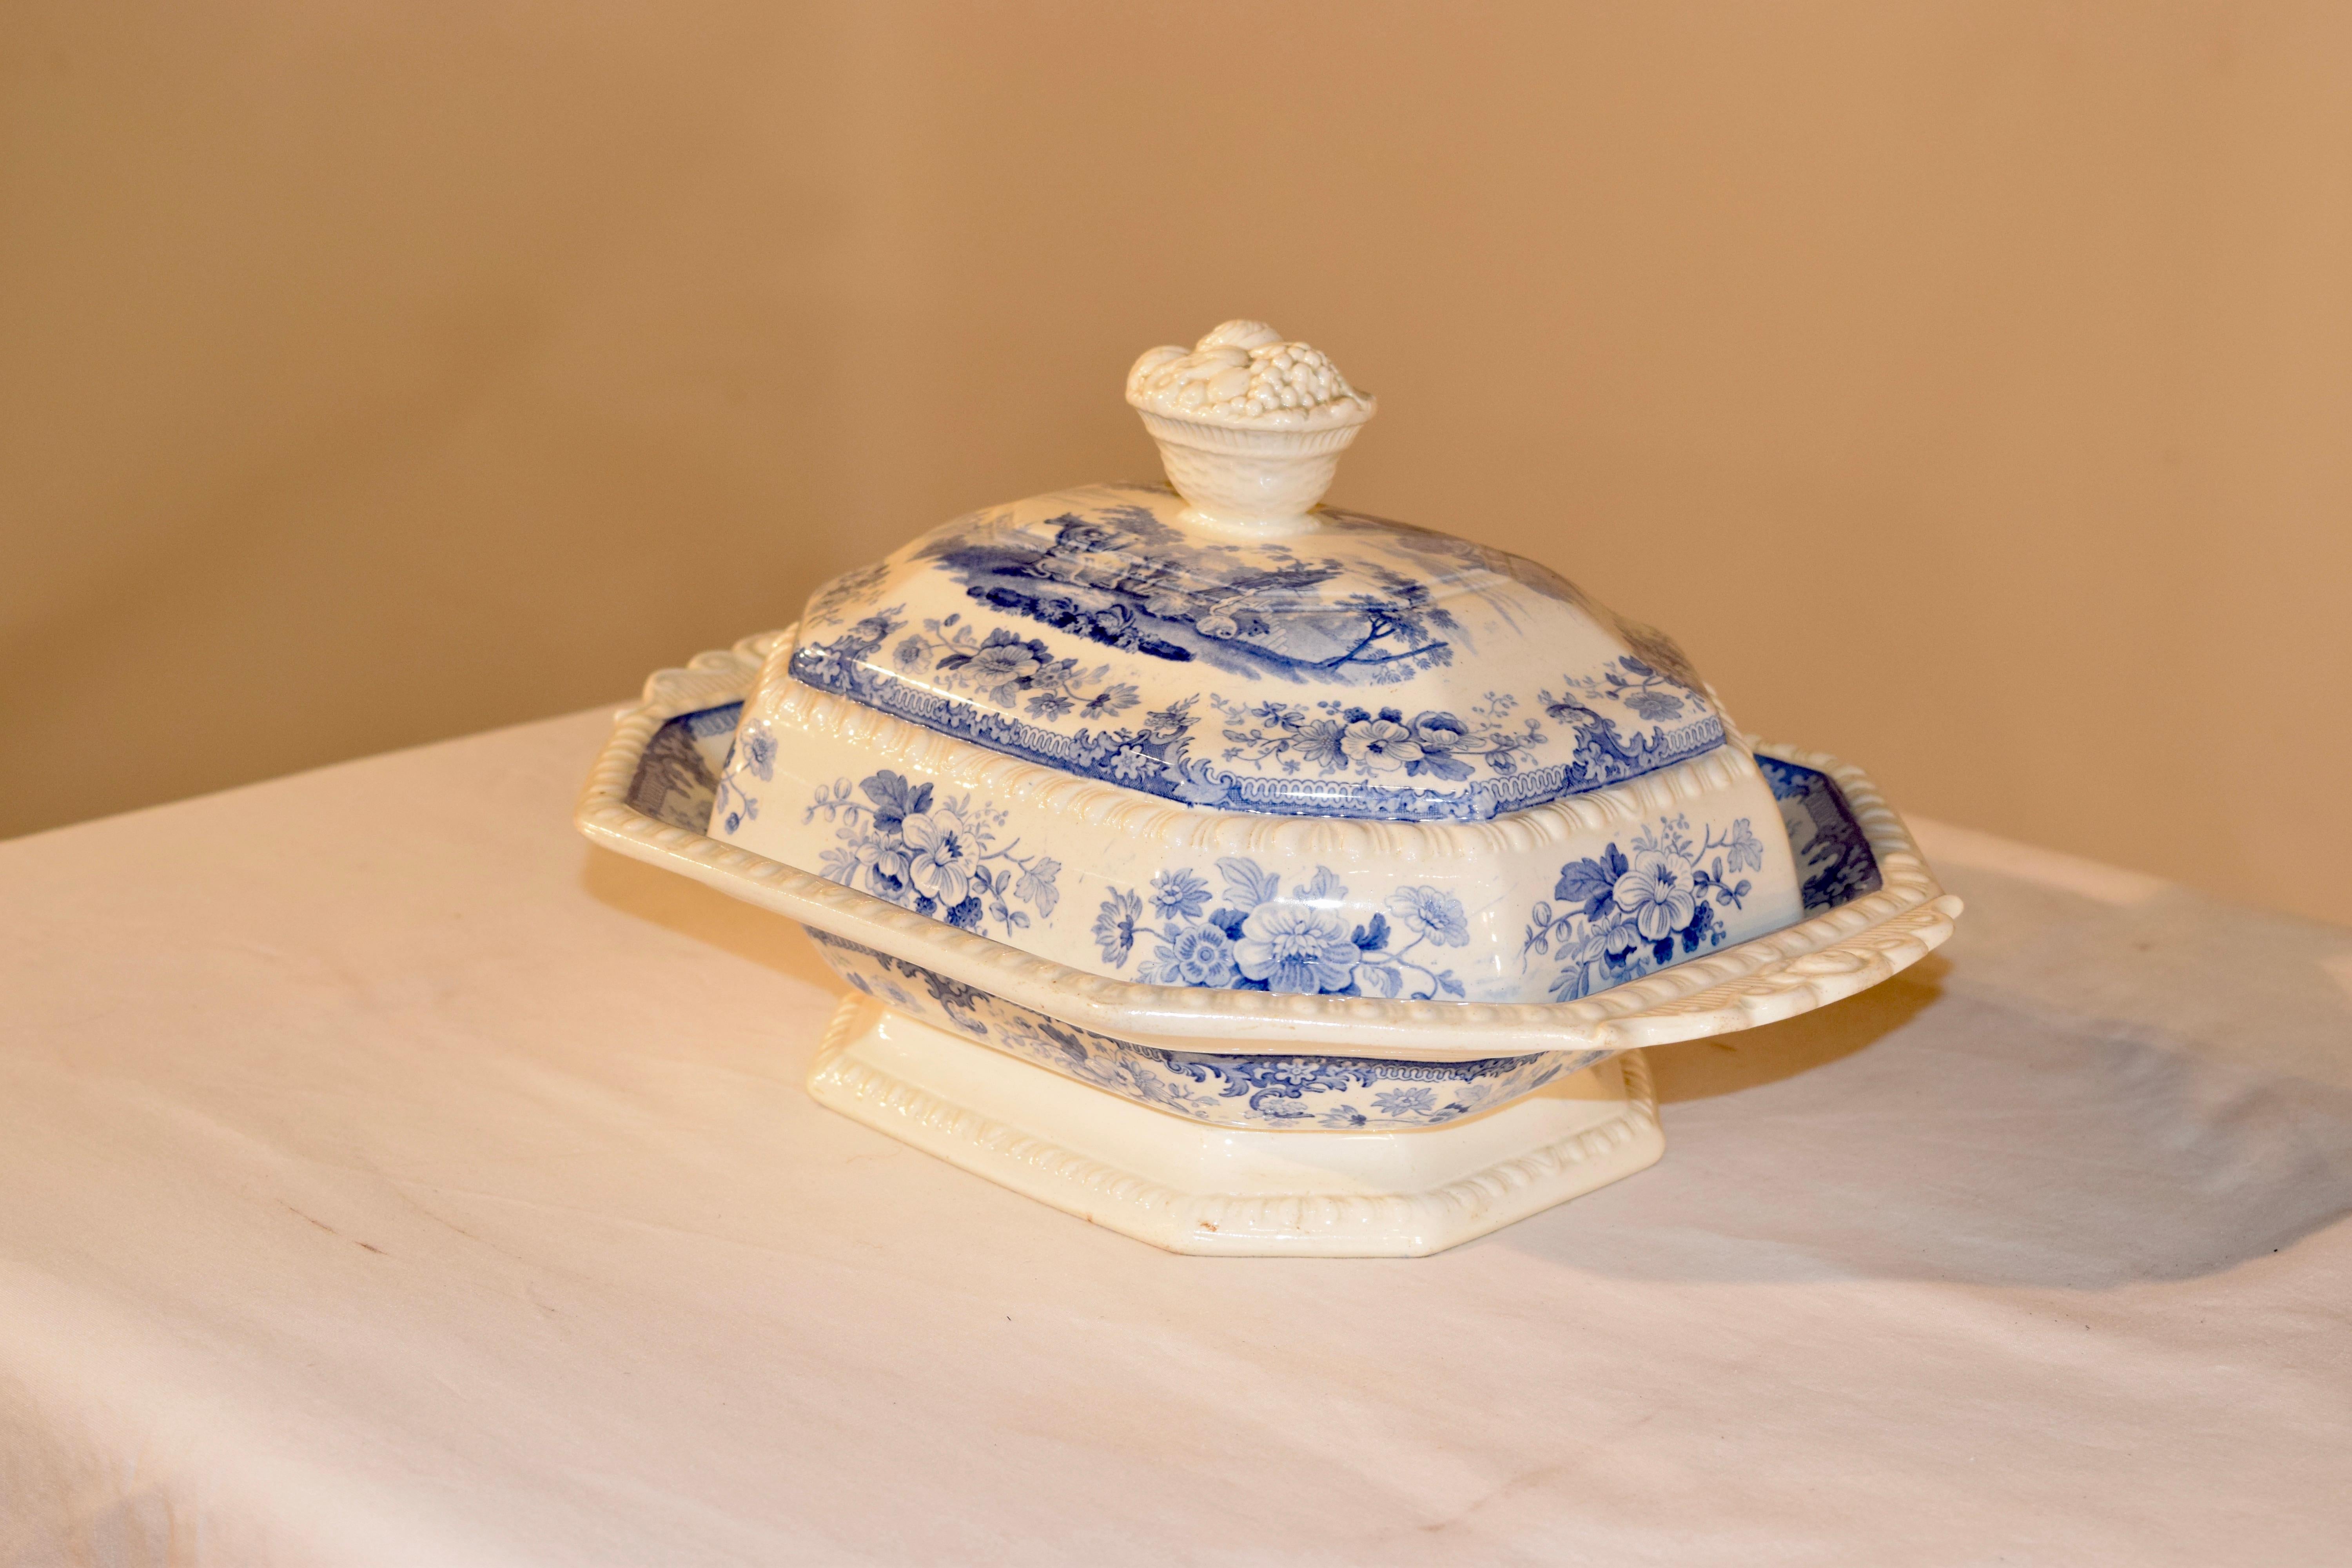 19th century English porcelain covered vegetable dish from the Staffordshire region of England with a fantastic fruit basket molded handle on the top and molded floral handles as well. The transfer pattern is of a wonderful pastoral scene with